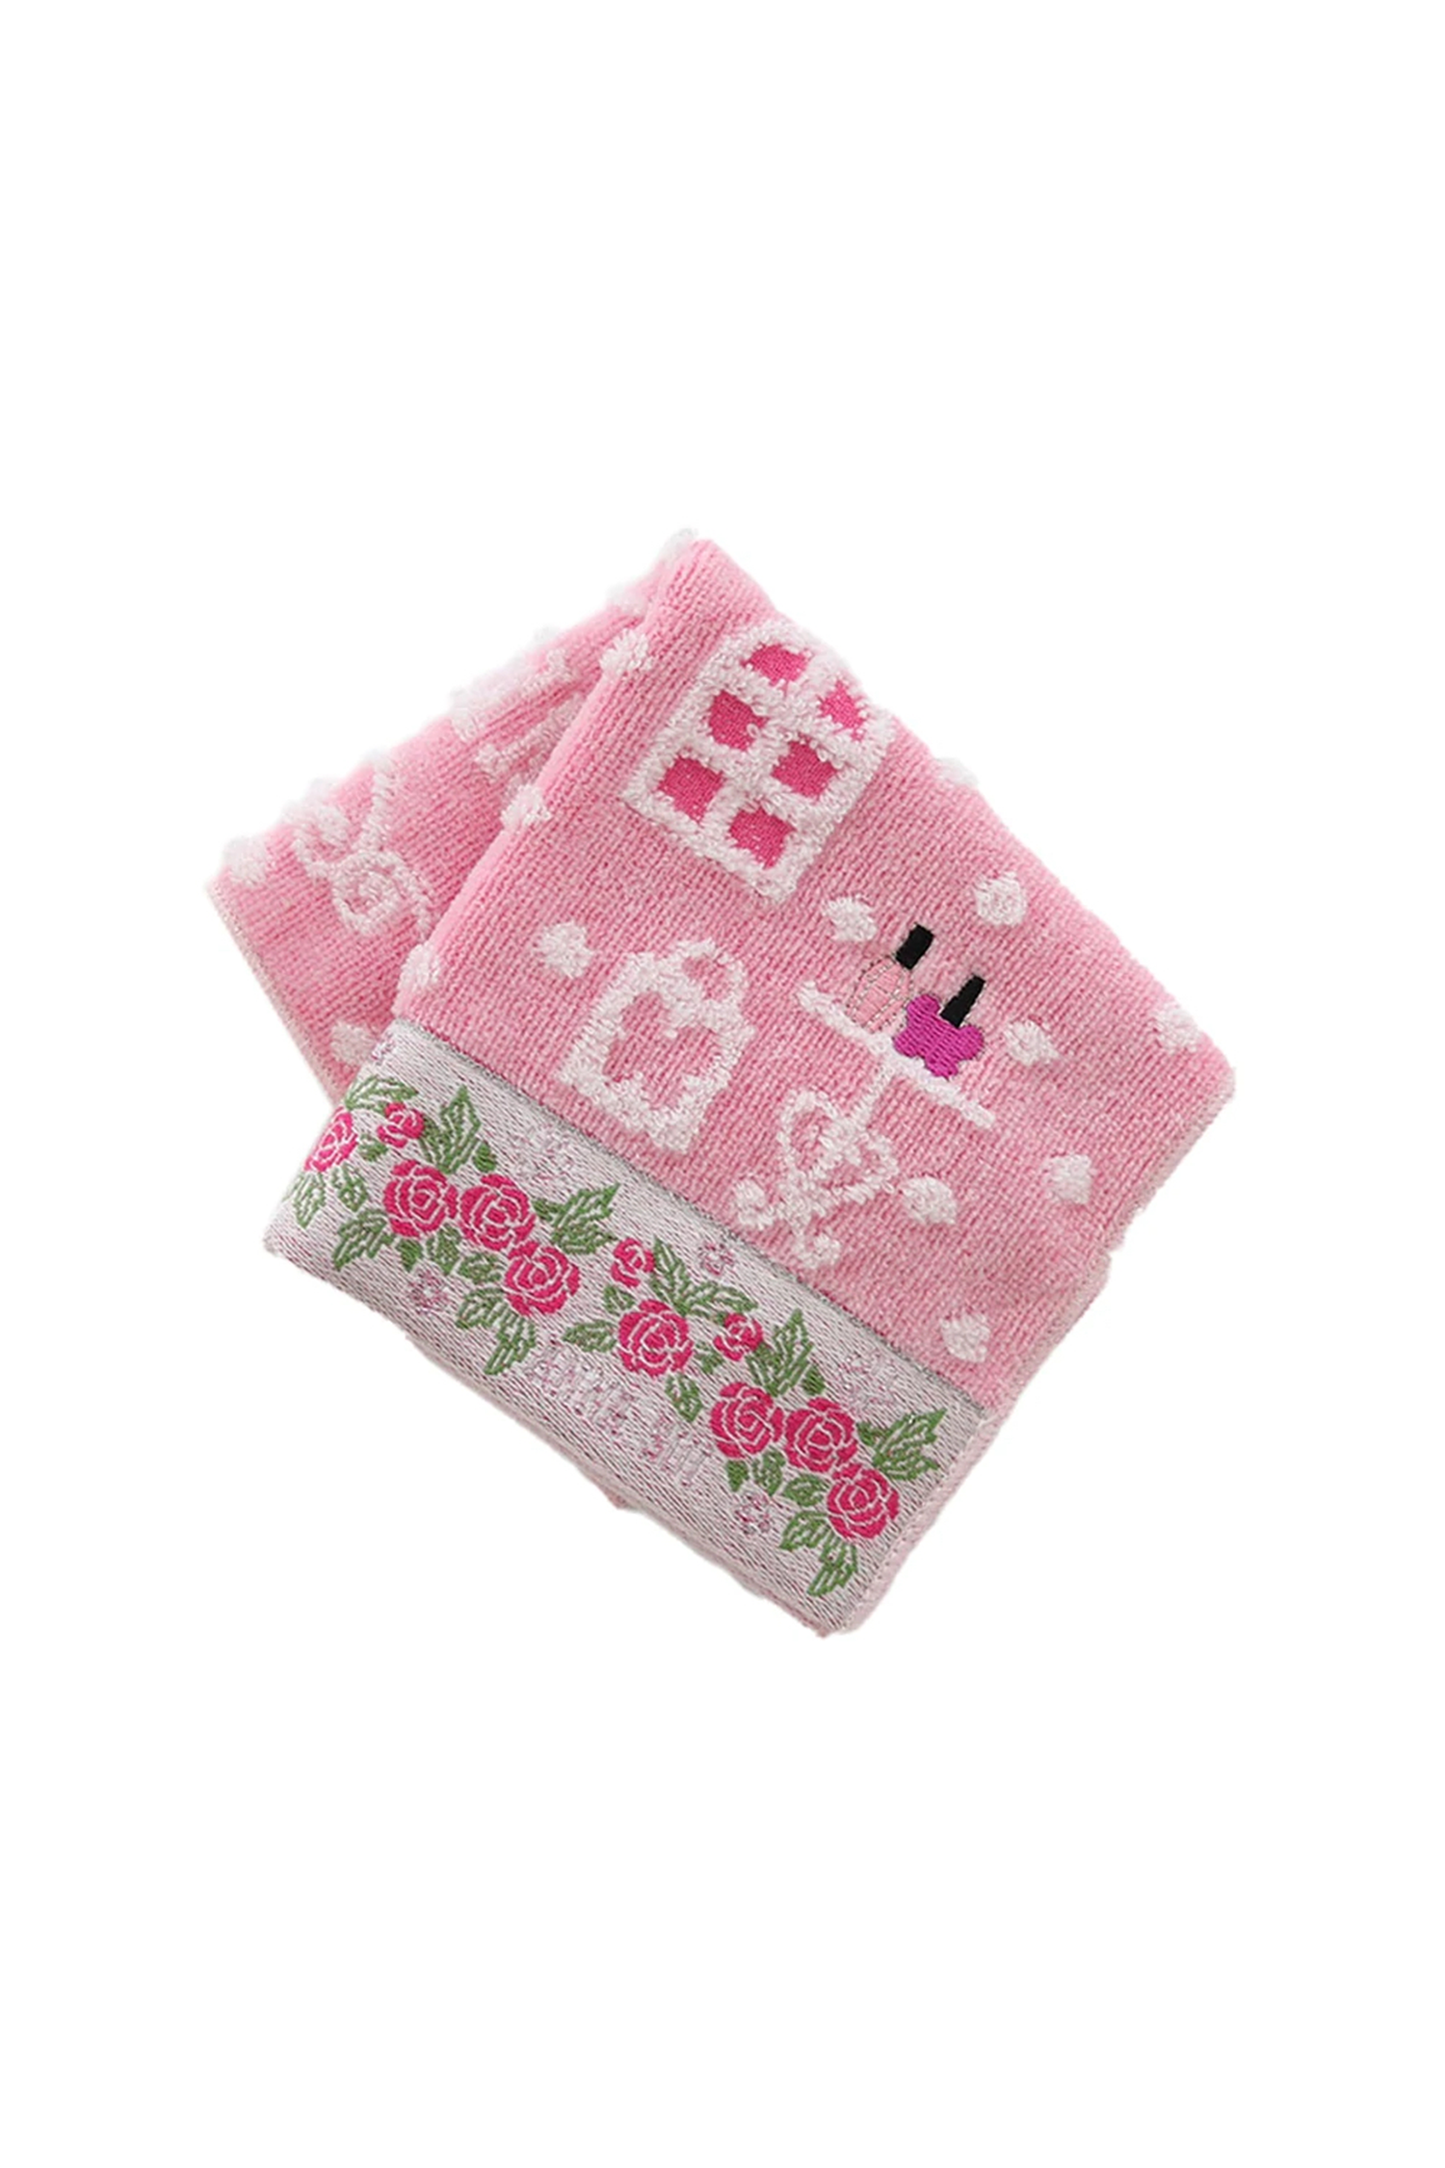 Washcloth, squared baby pink, white shop design, white Anna Sui label on bottom with pink roses line